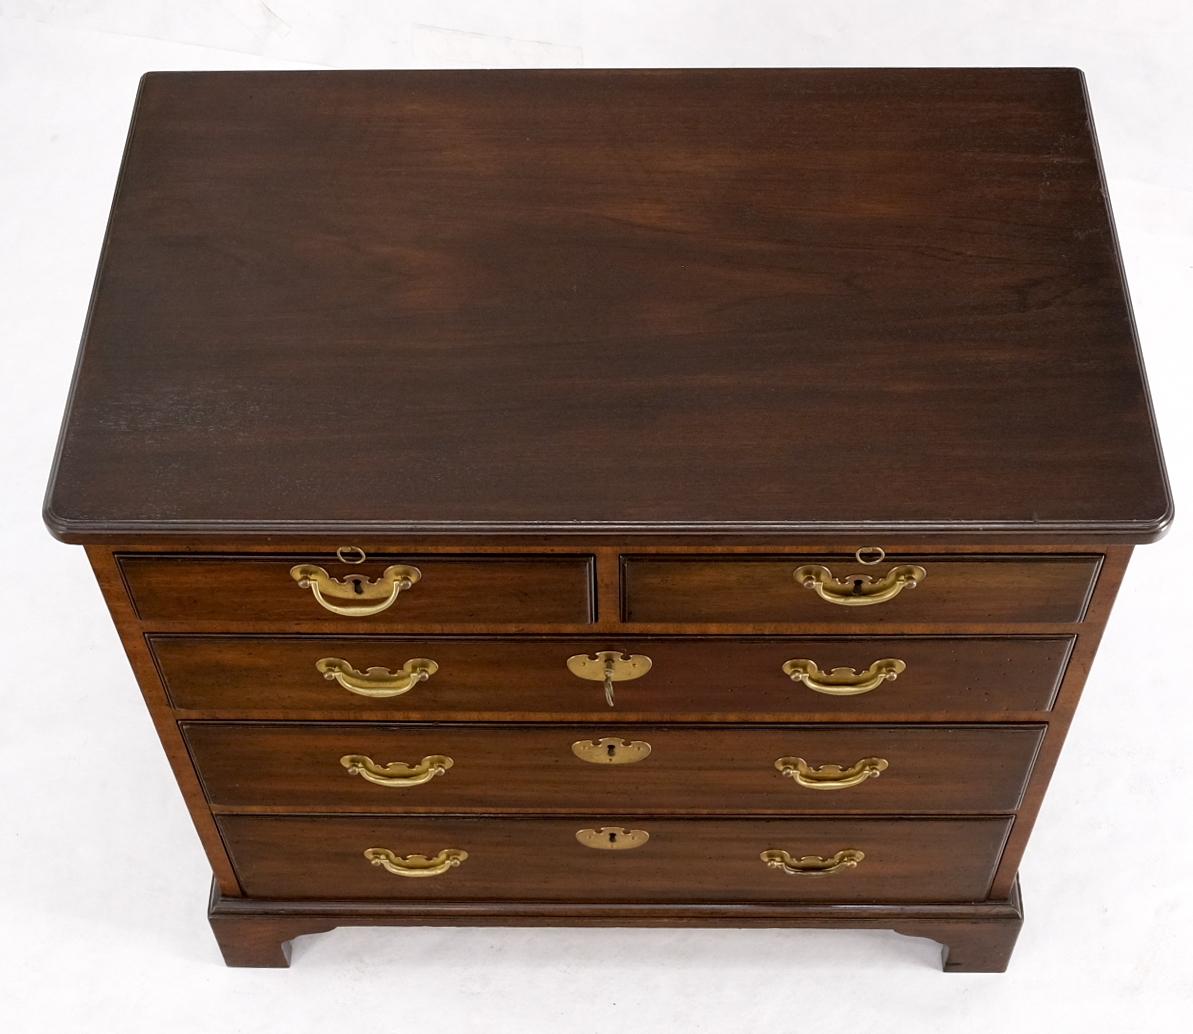 Kittinger 5 drawers pull out tray mahogany federal style bachelor chest dresser.
Lockable drawer.